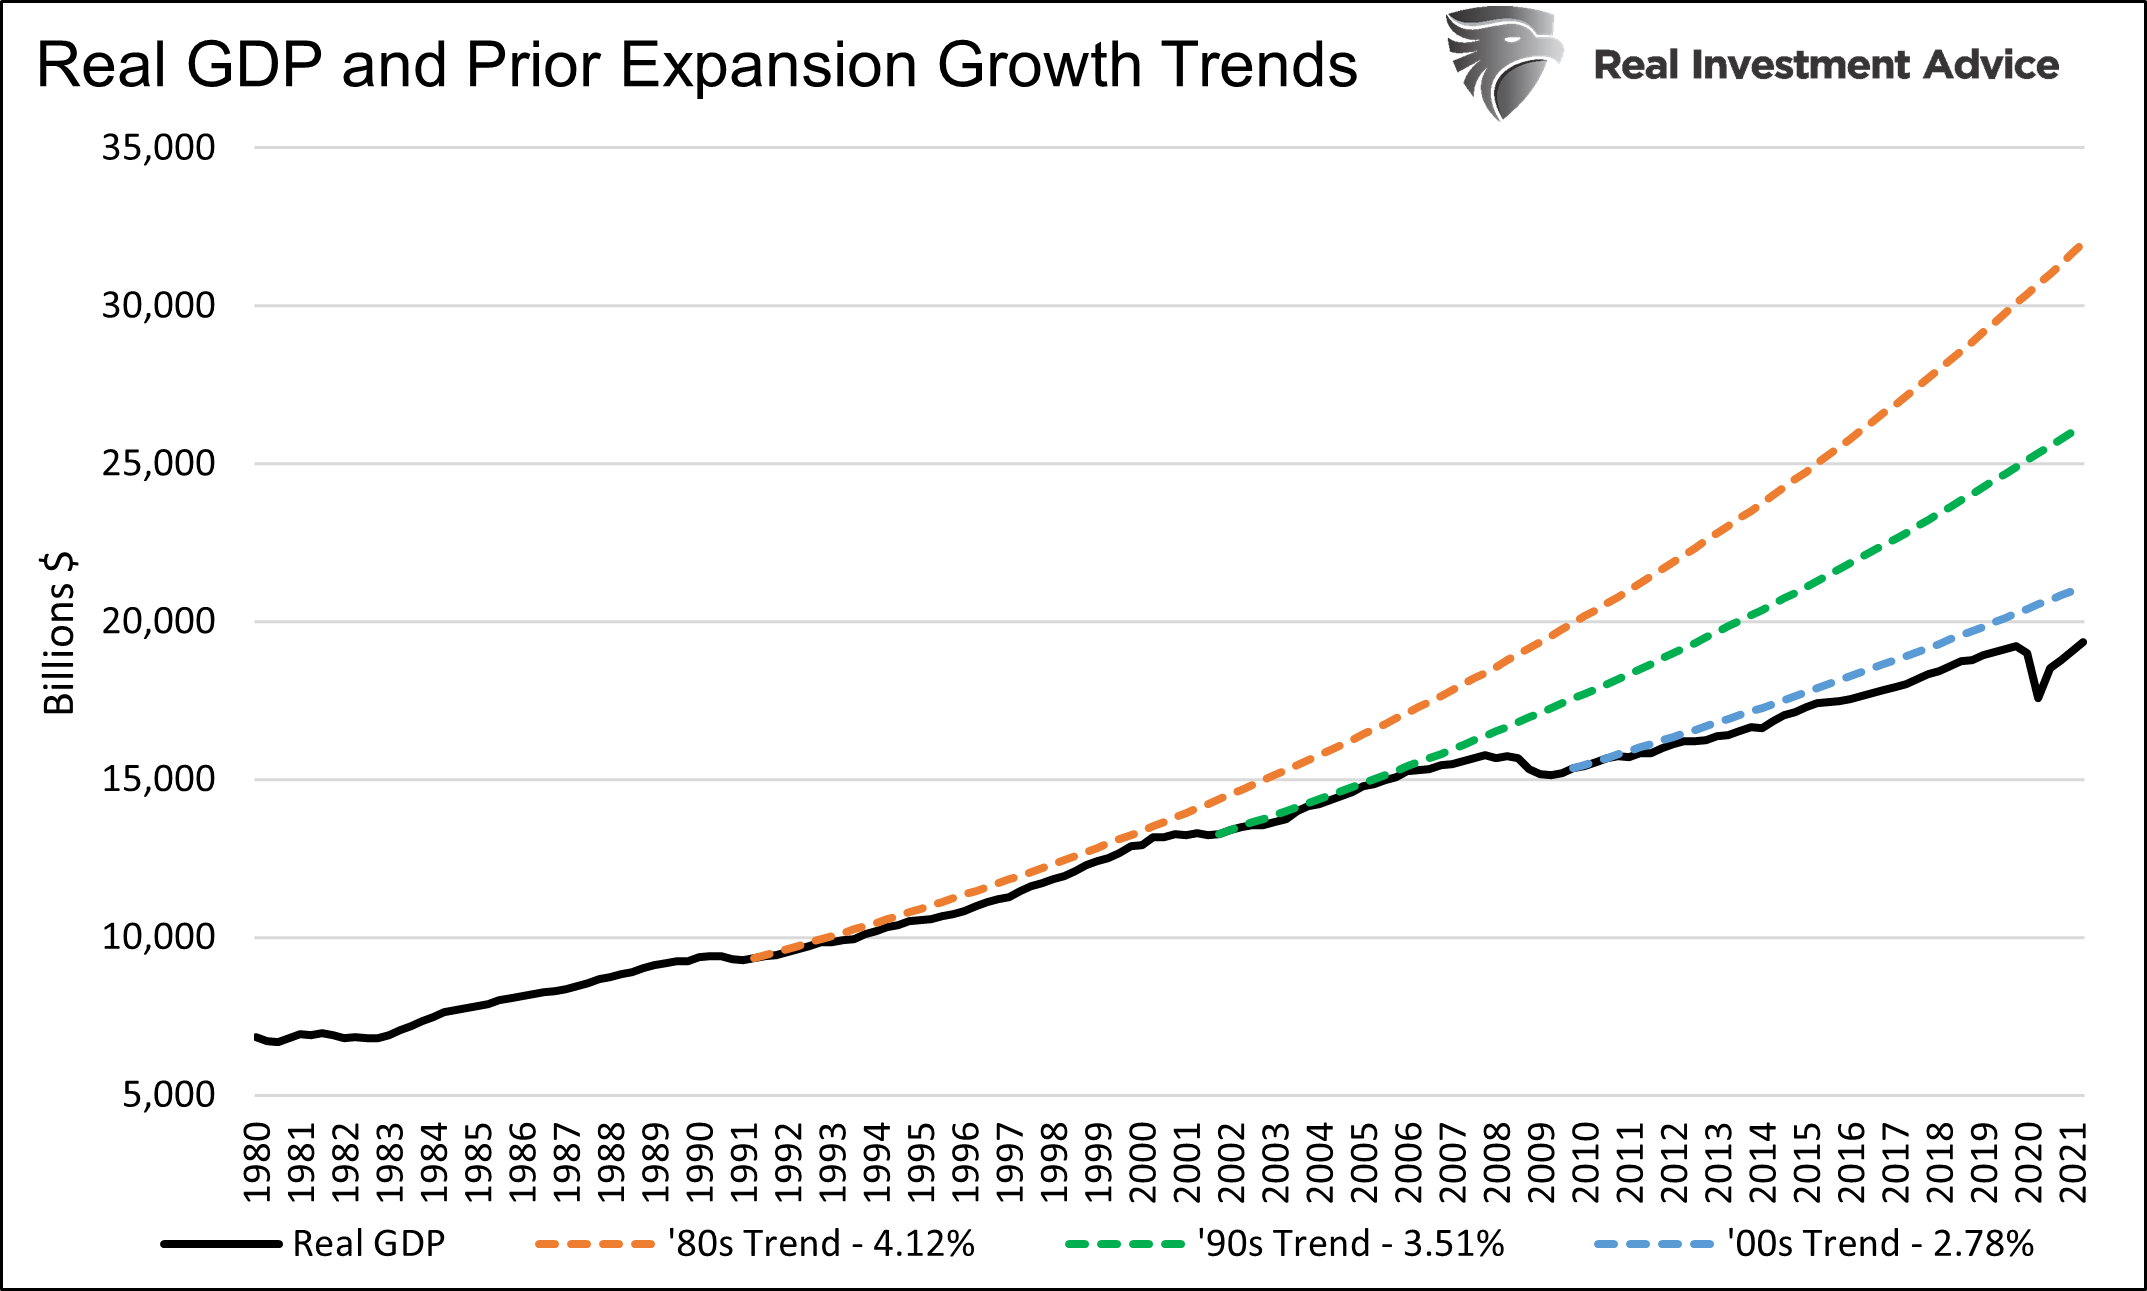 Real GDP & Prior Expansion Growth Trends